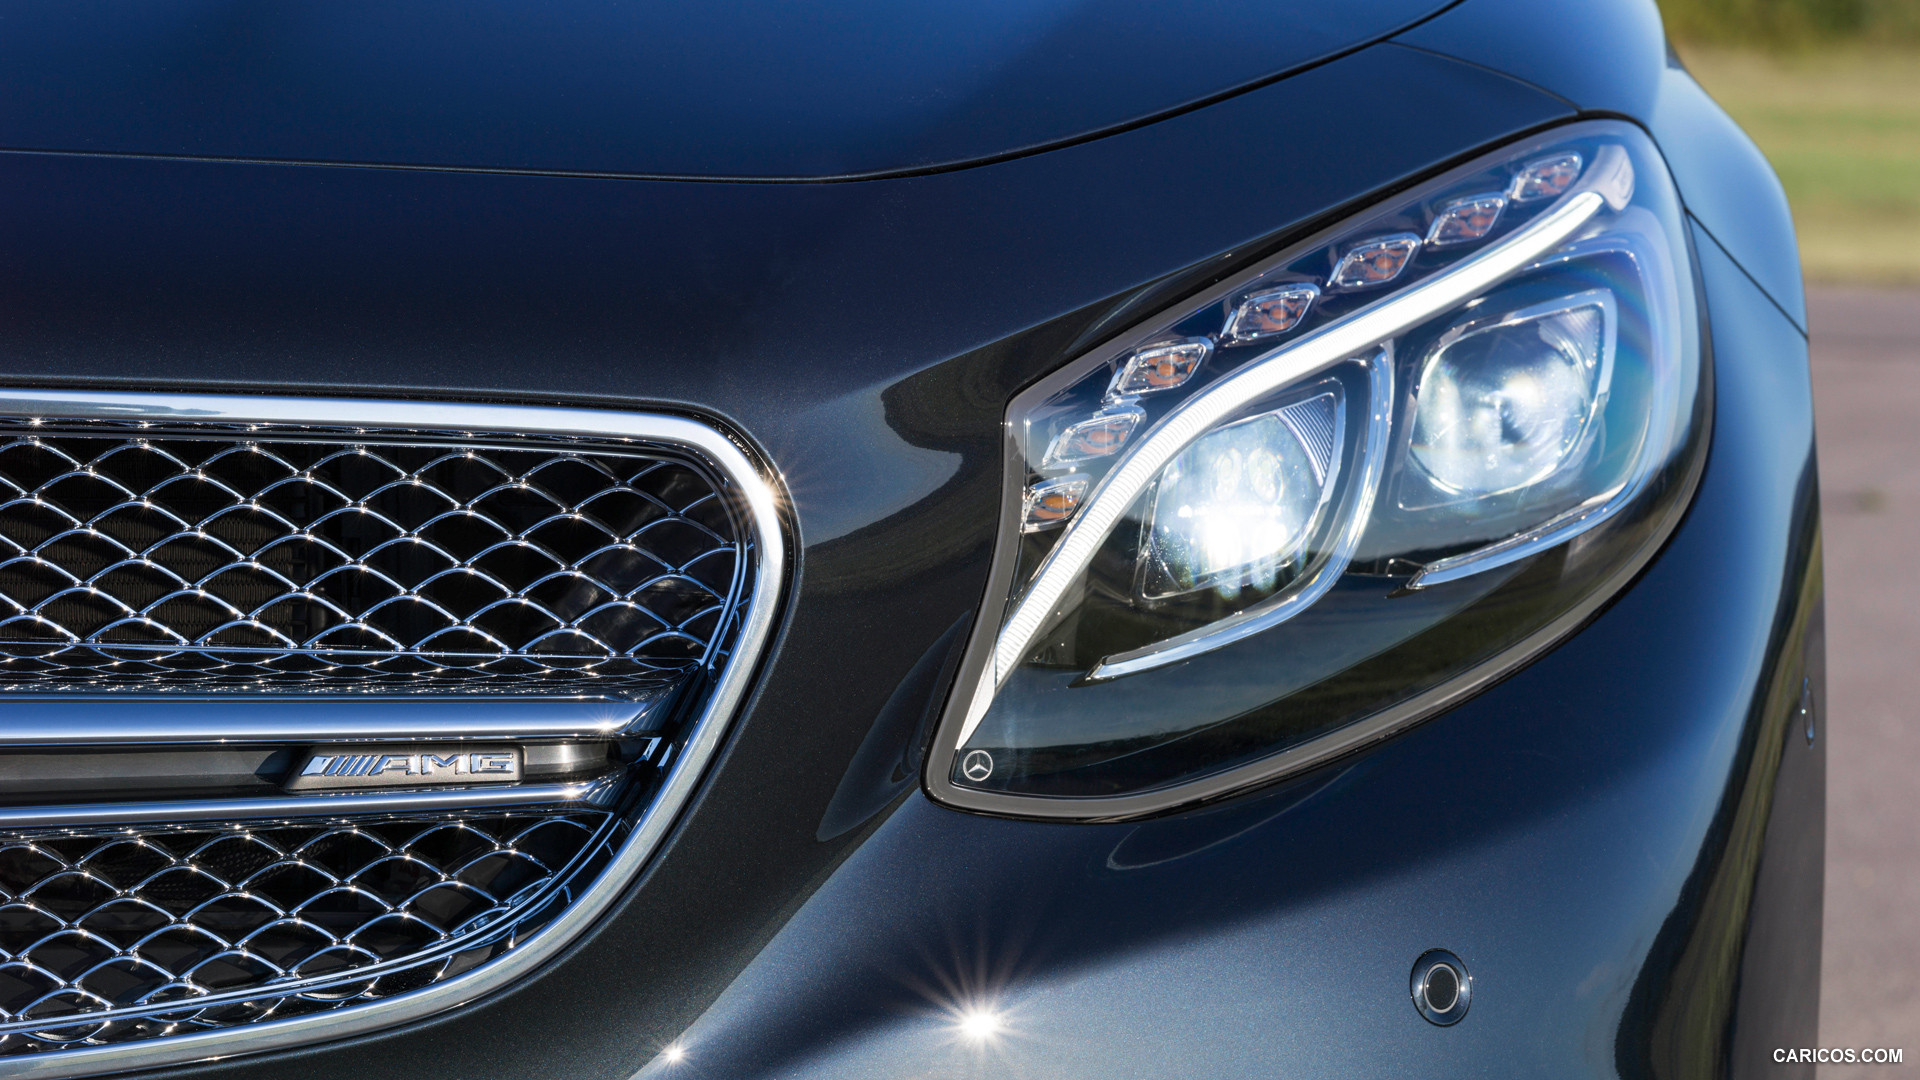 2015 Mercedes-Benz S65 AMG Coupe (Anthracite Blue) - Headlight, #18 of 101